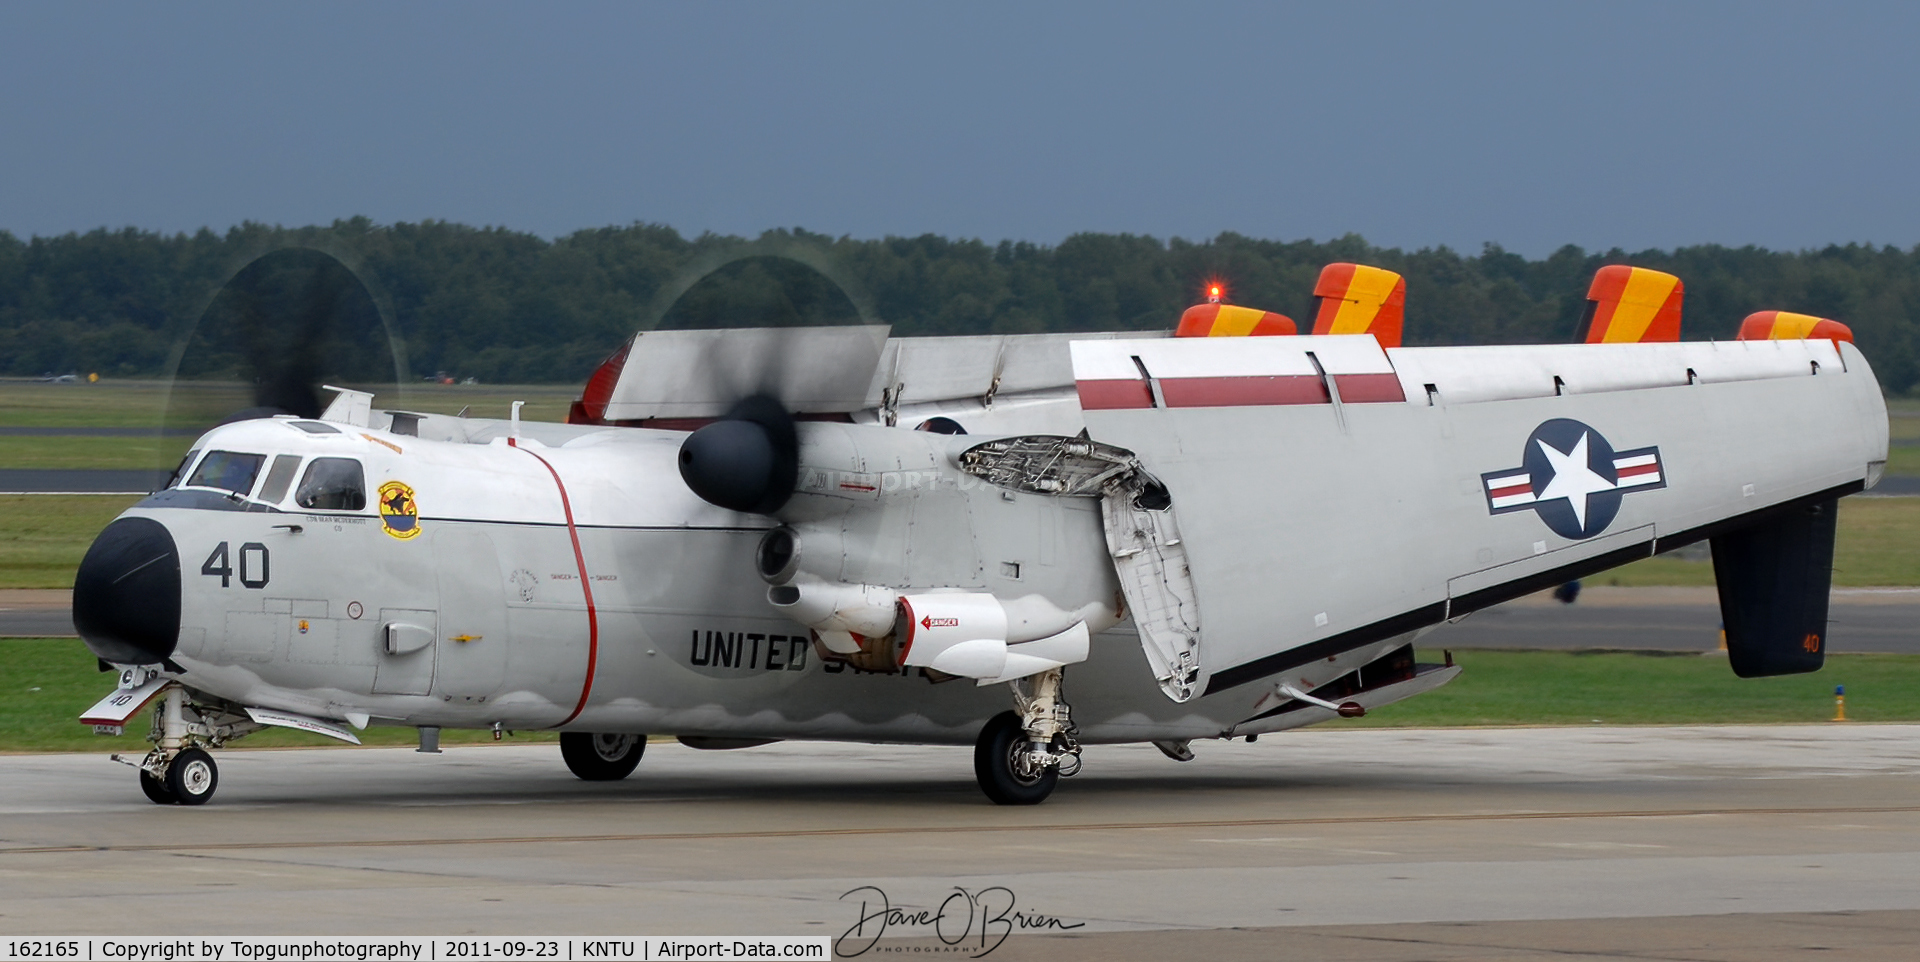 162165, Grumman C-2A Greyhound C/N 45, RAWHIDE40 pulls its wings back to safely taxi onto the static ramp.